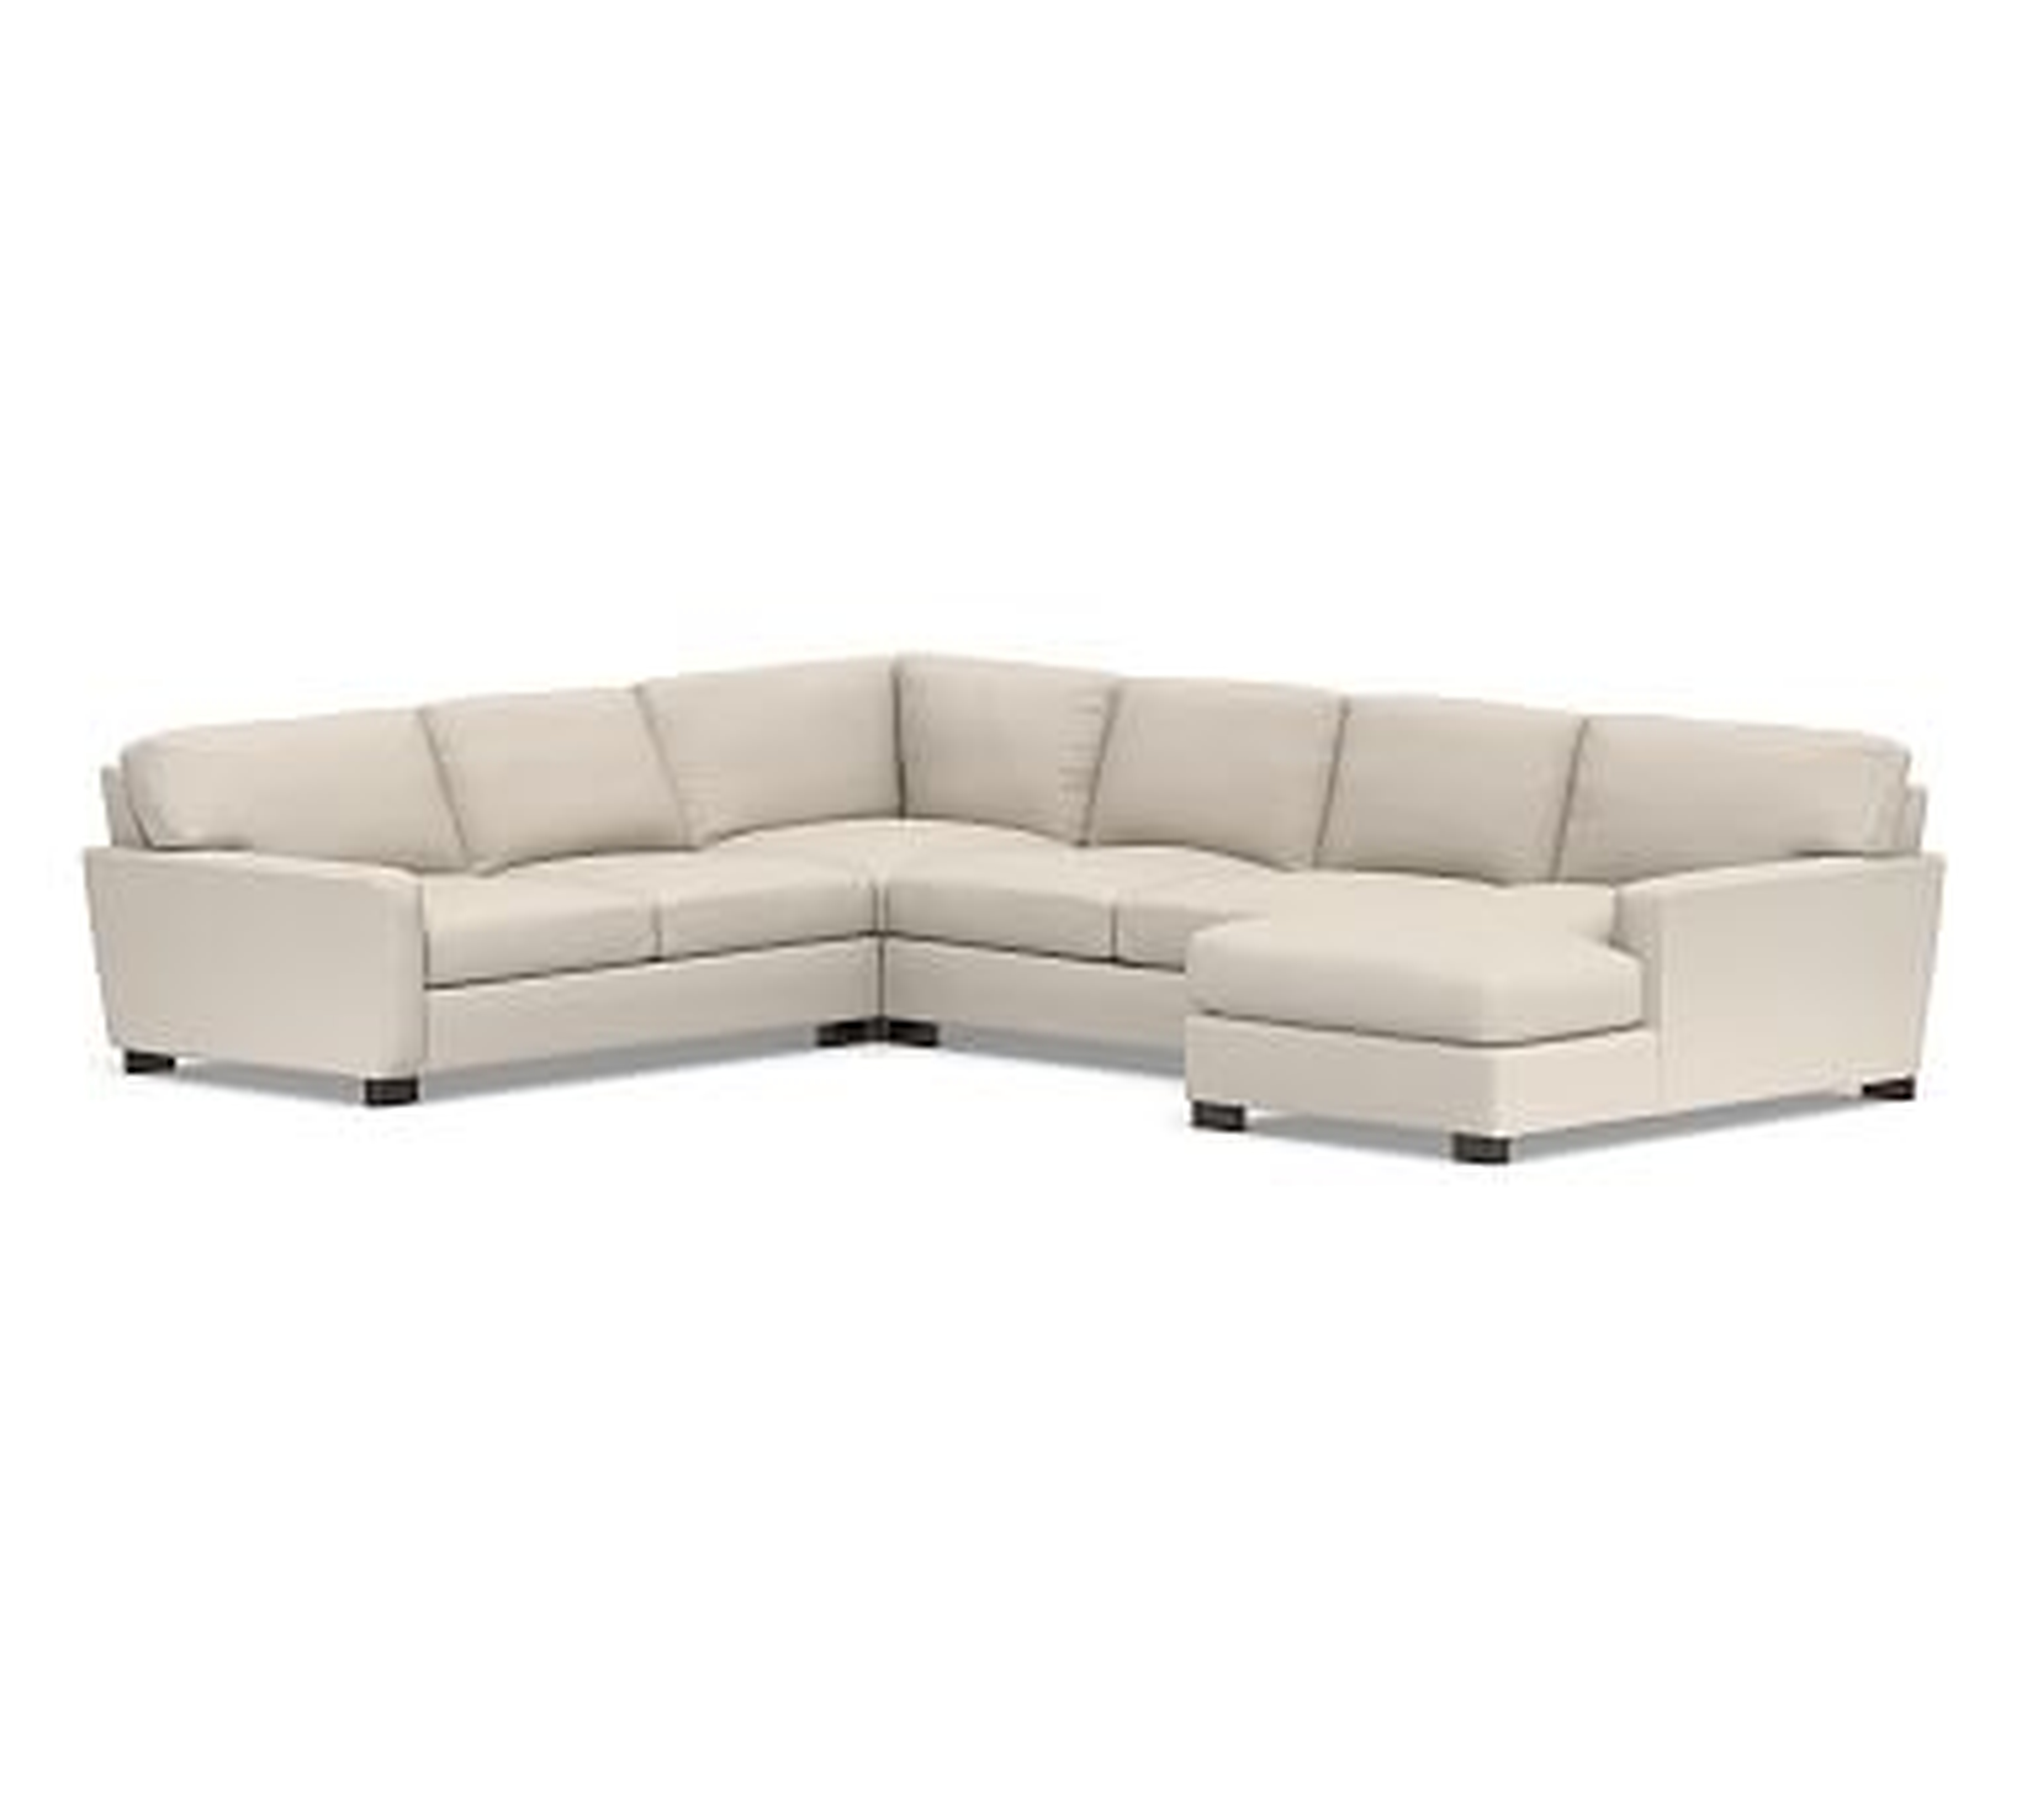 Turner Square Arm Upholstered Left Arm 4-Piece Chaise Sectional with Nailheads, Down Blend Wrapped Cushions, Performance Brushed Basketweave Oatmeal - Pottery Barn